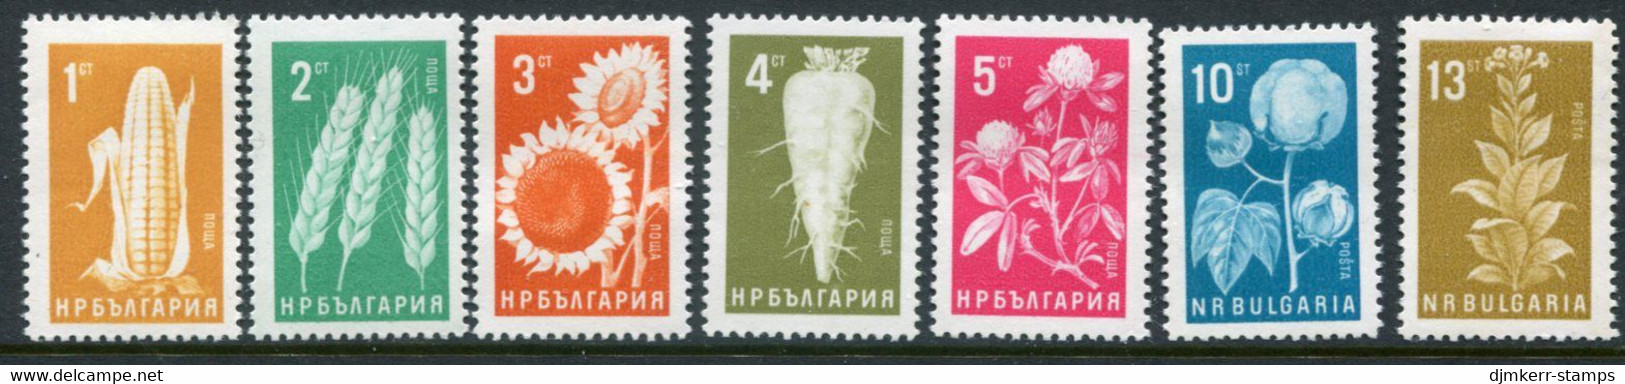 BULGARIA 1965 Agricultural Products  MNH / ** .  Michel 1522-28 - Unused Stamps